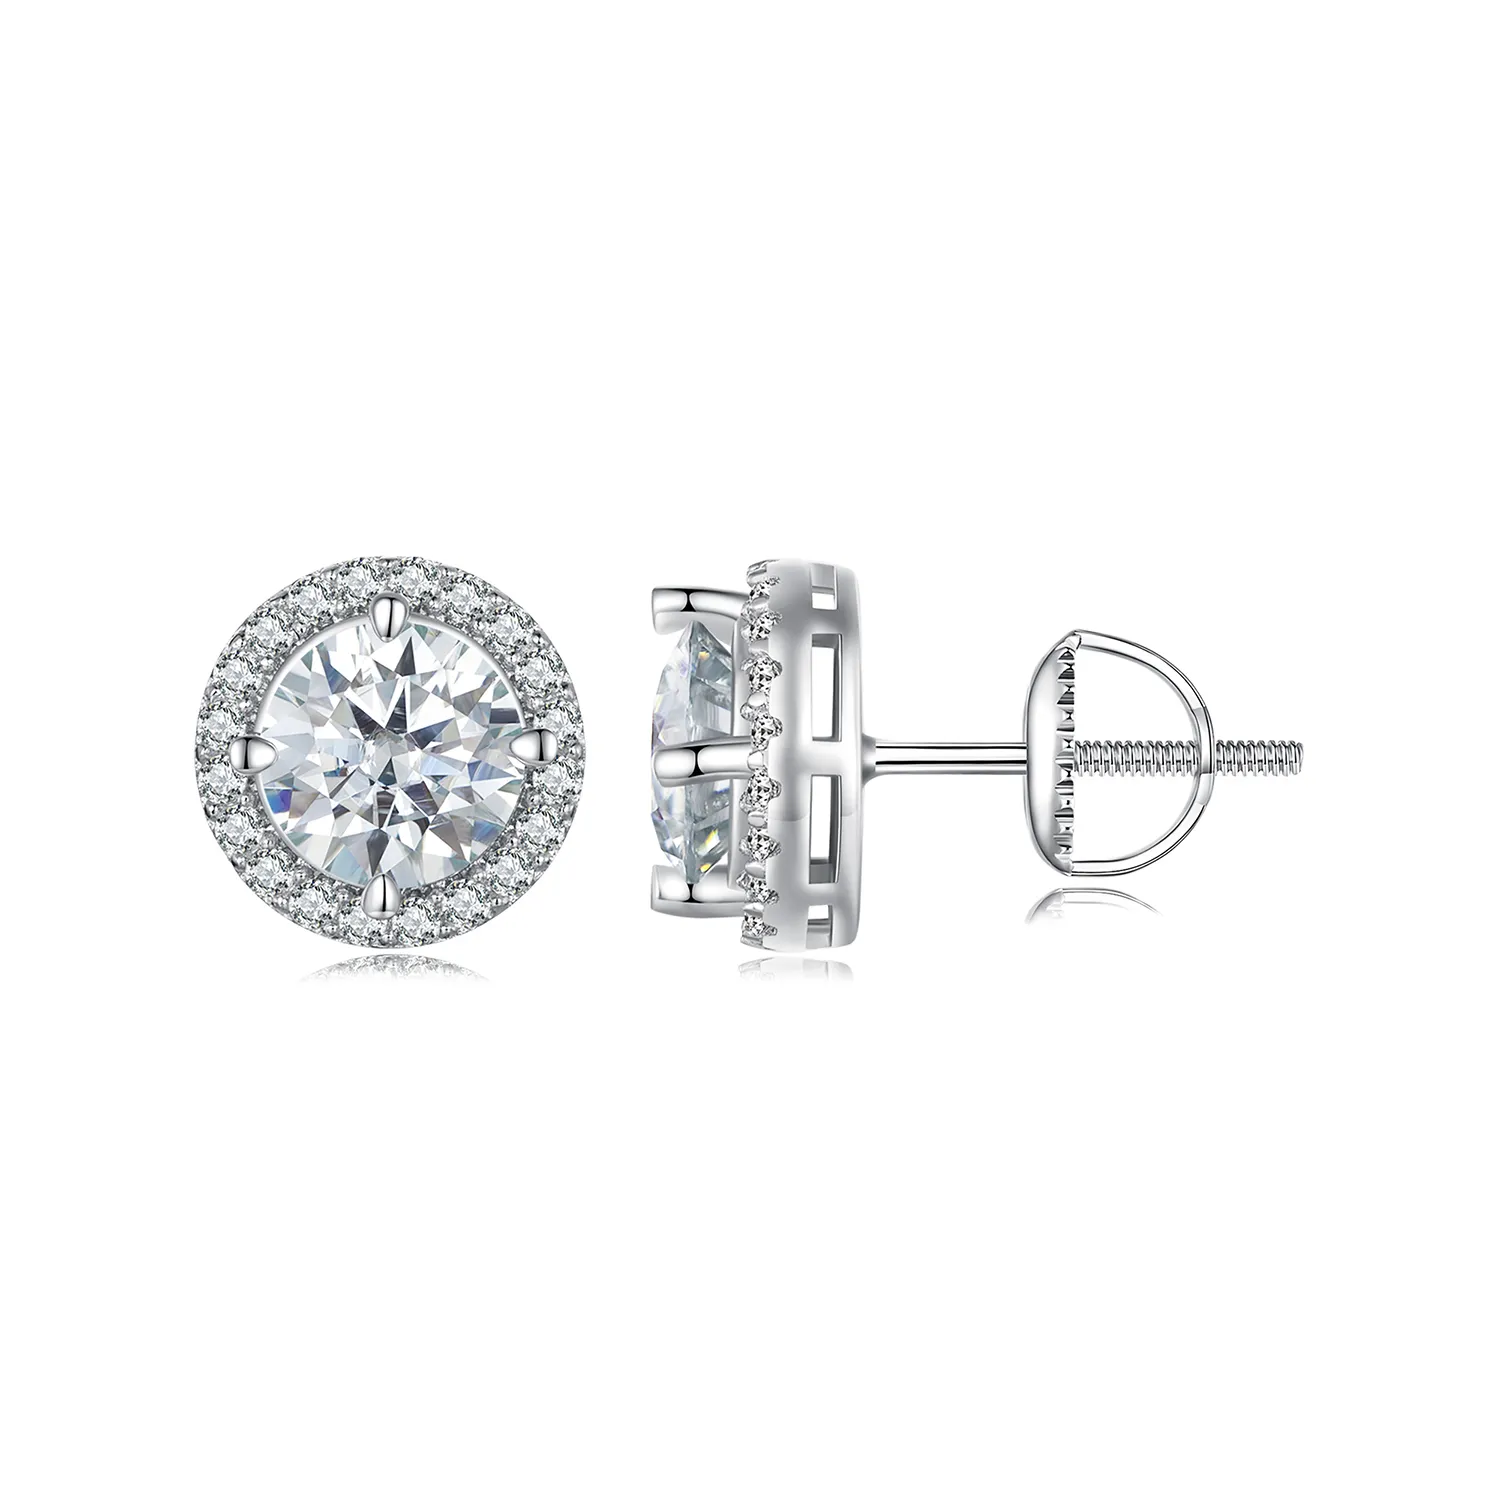 Pandora Style 1Ct Moissanite Studs Earrings(Two Certificates) - MSE039